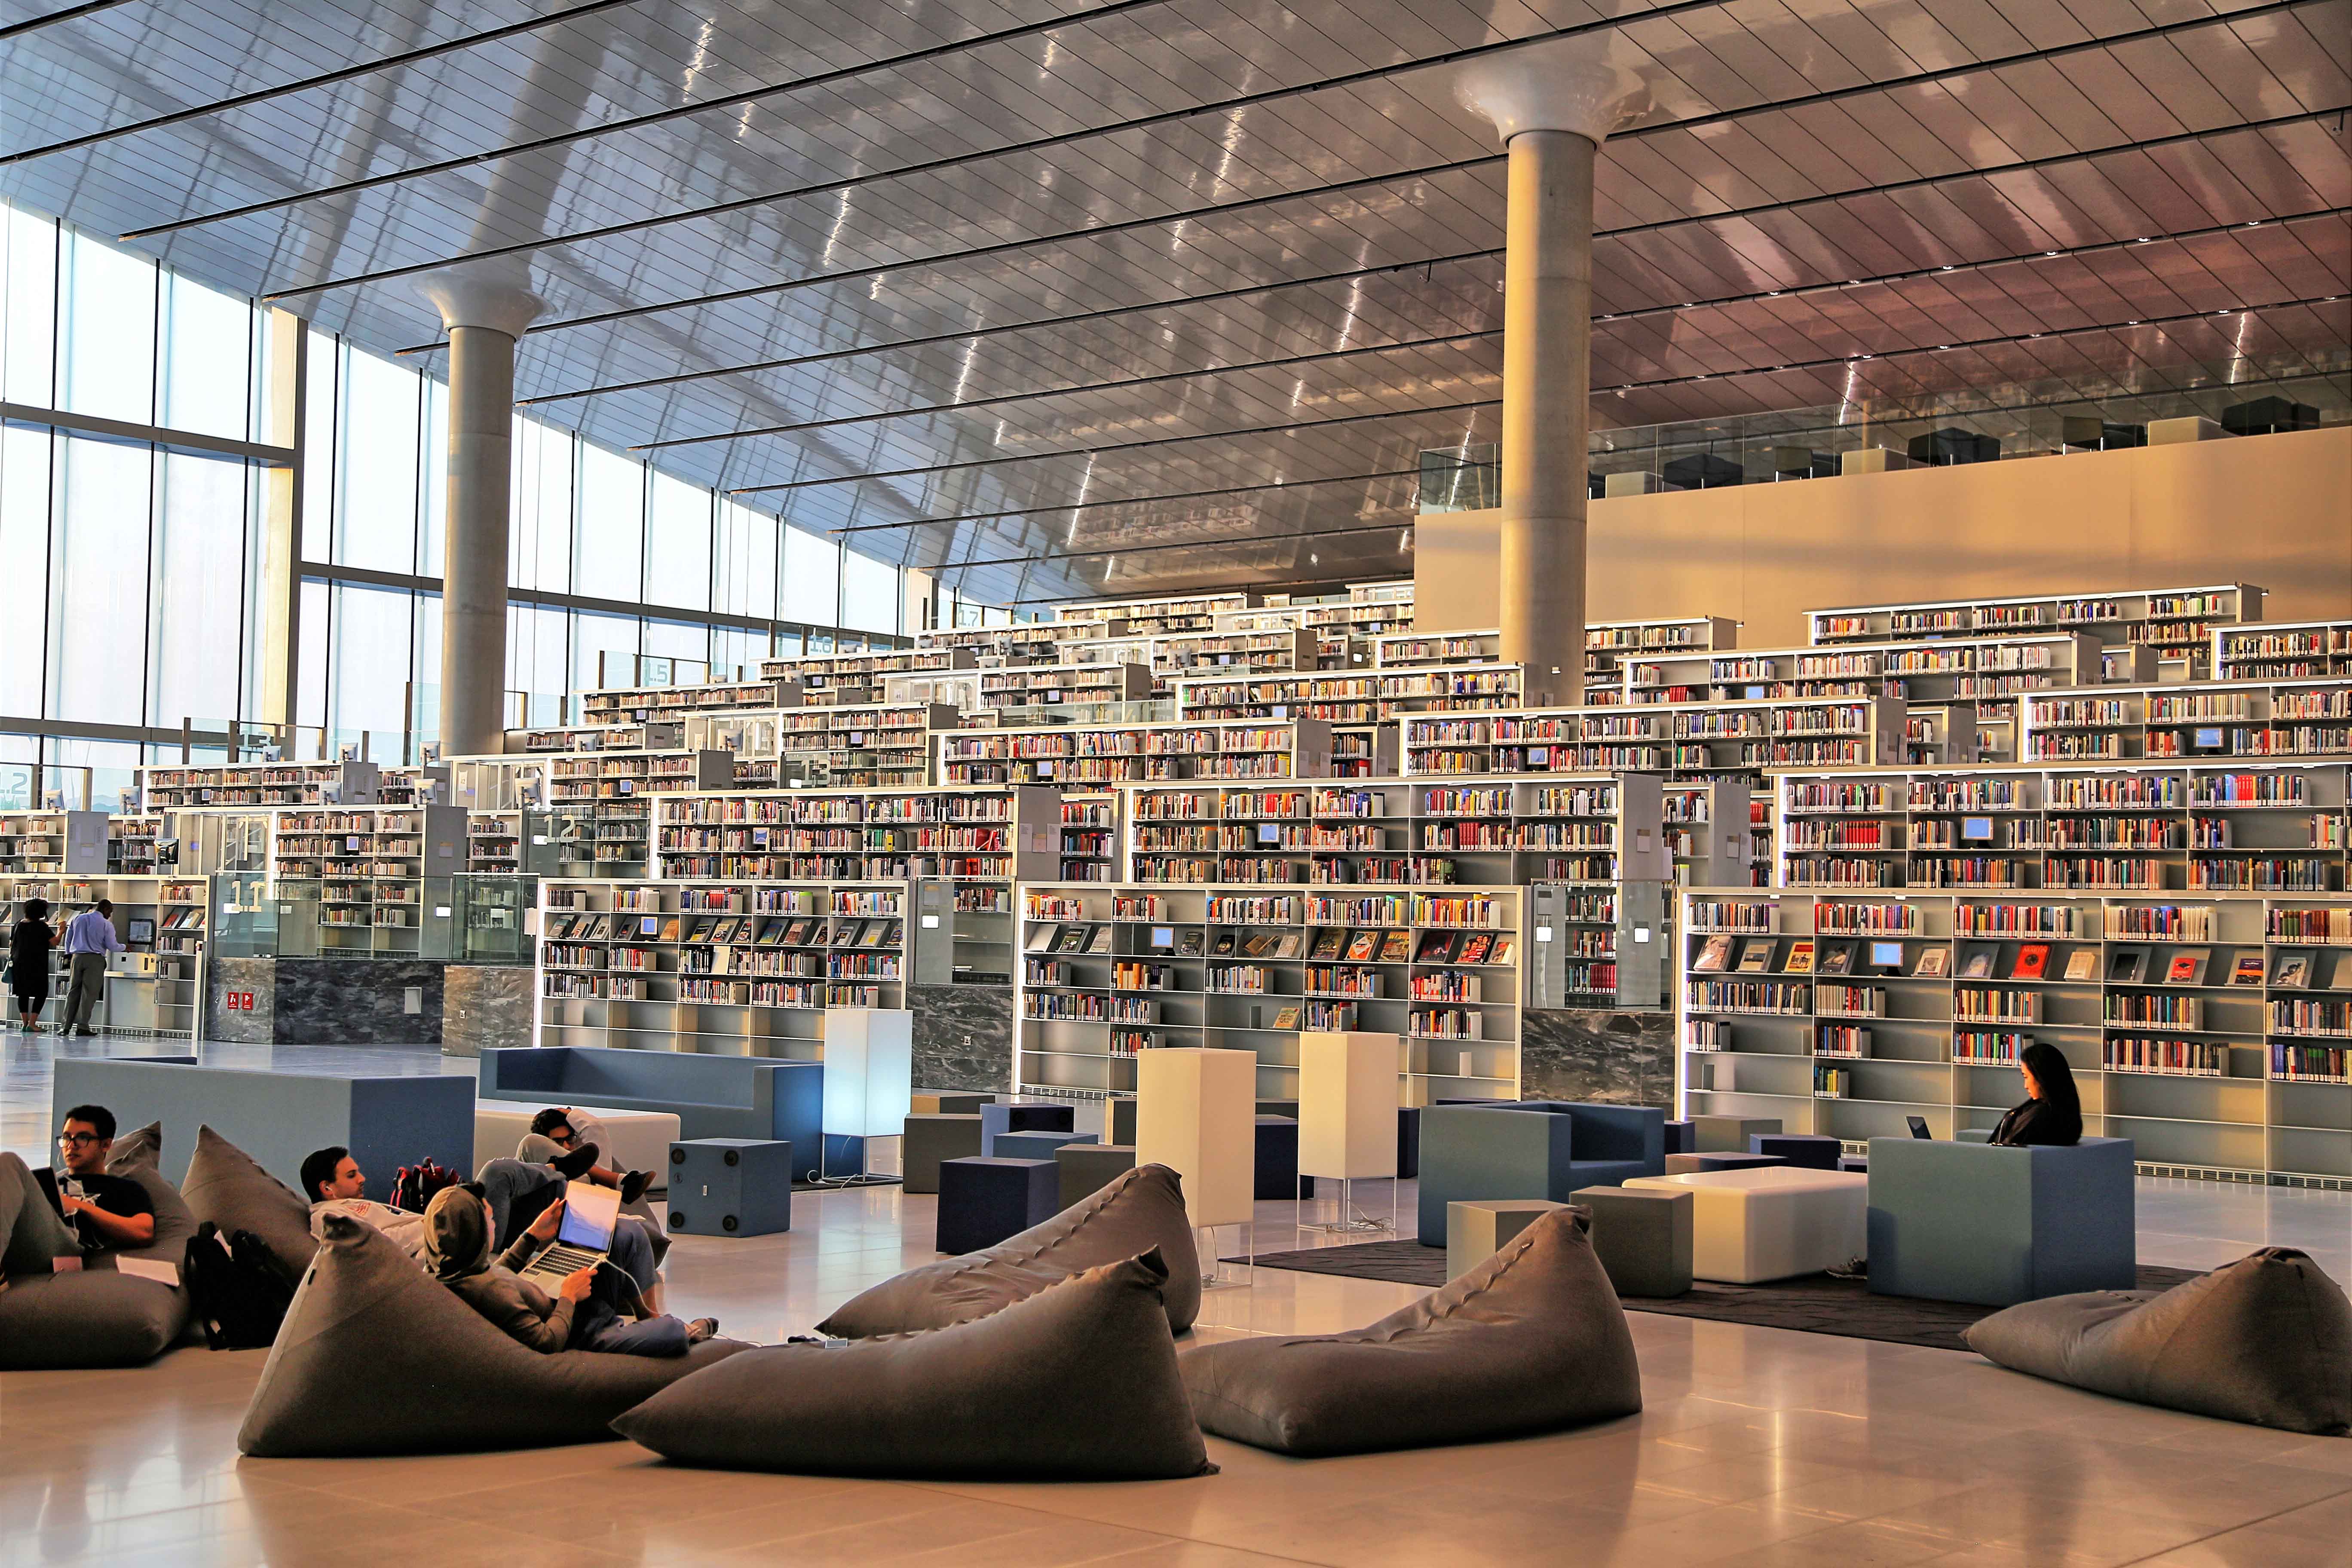 Tiered rows of stacks of books set against a vaulted ceiling of concrete and glass. People in large bean bangs in the foreground.